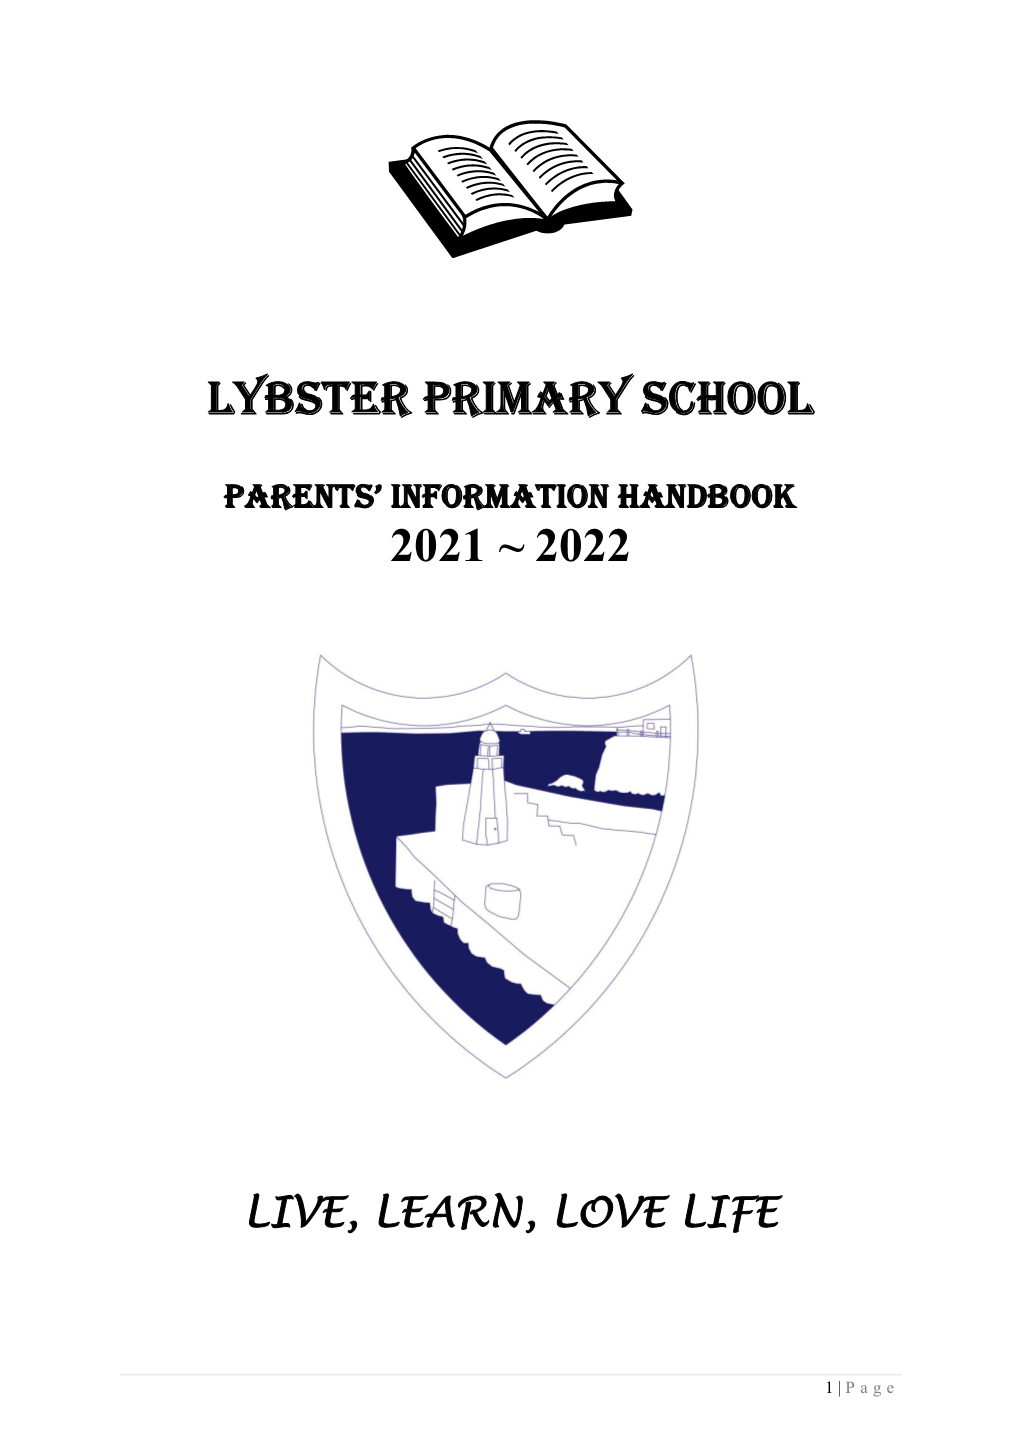 Lybster Primary School 2021 ~ 2022